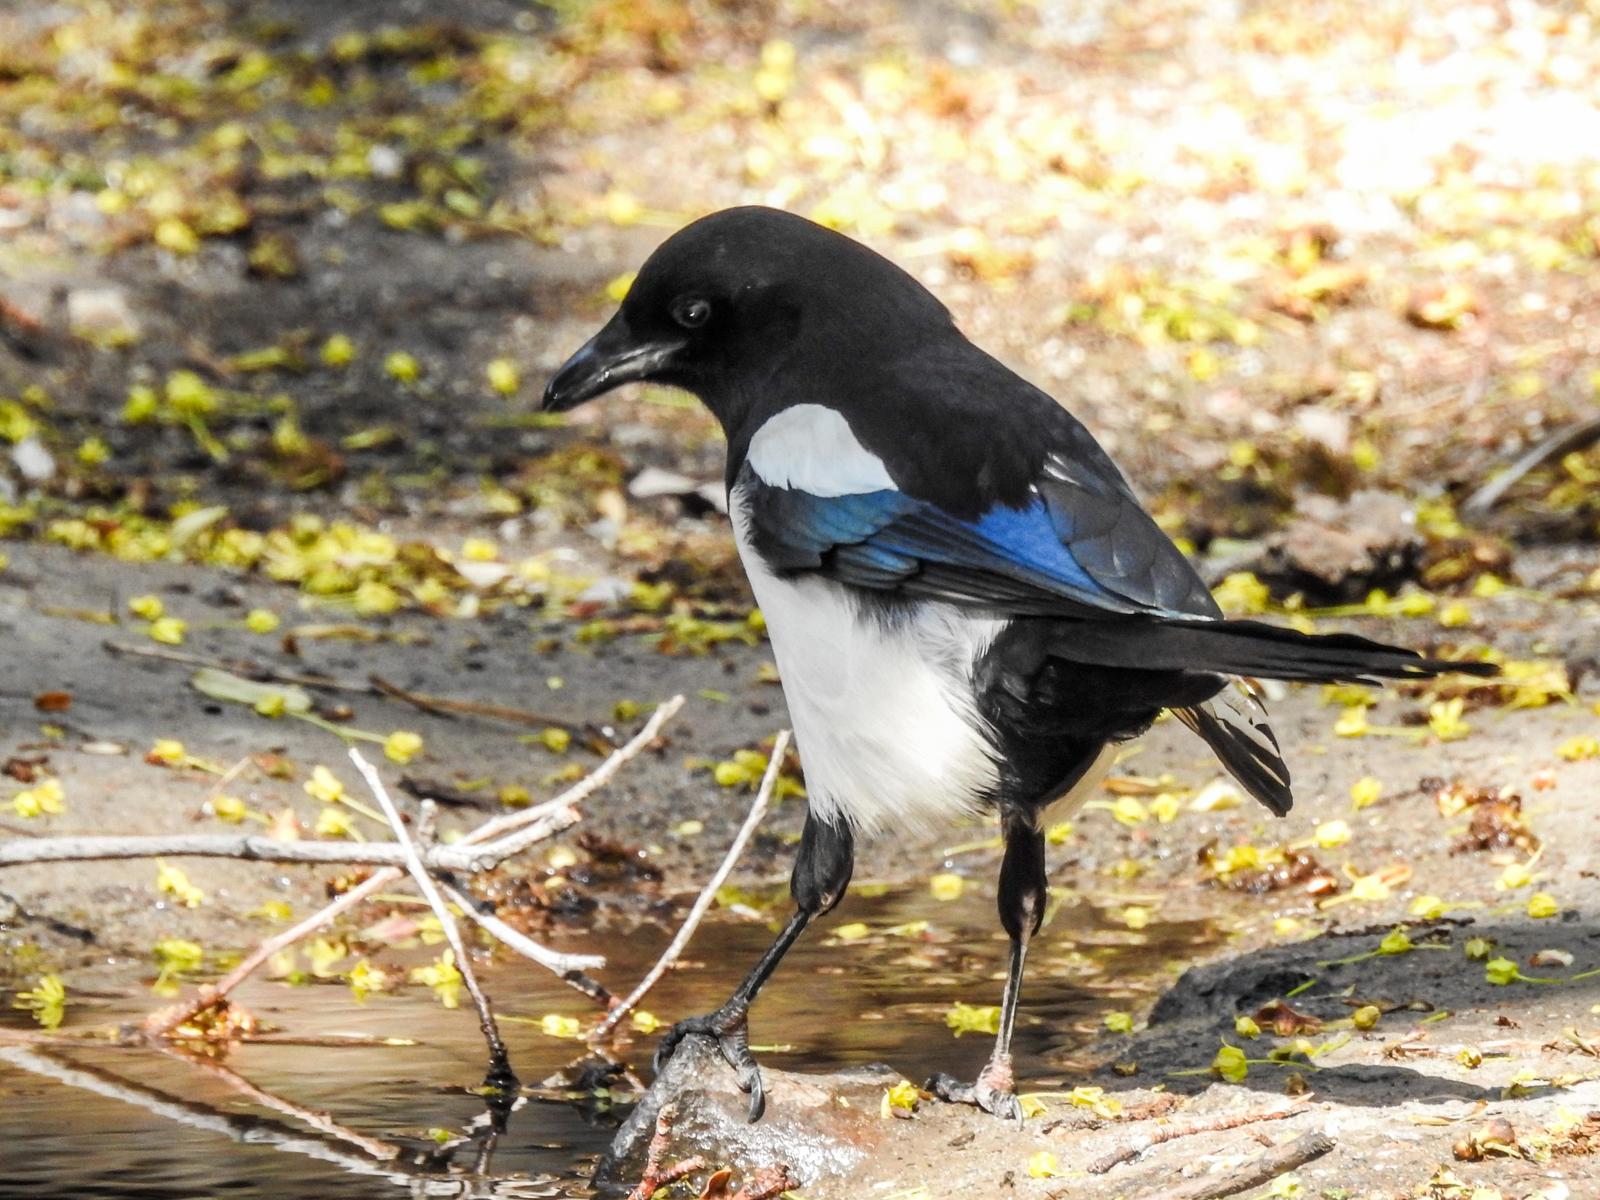 Eurasian Magpie Photo by African Googre